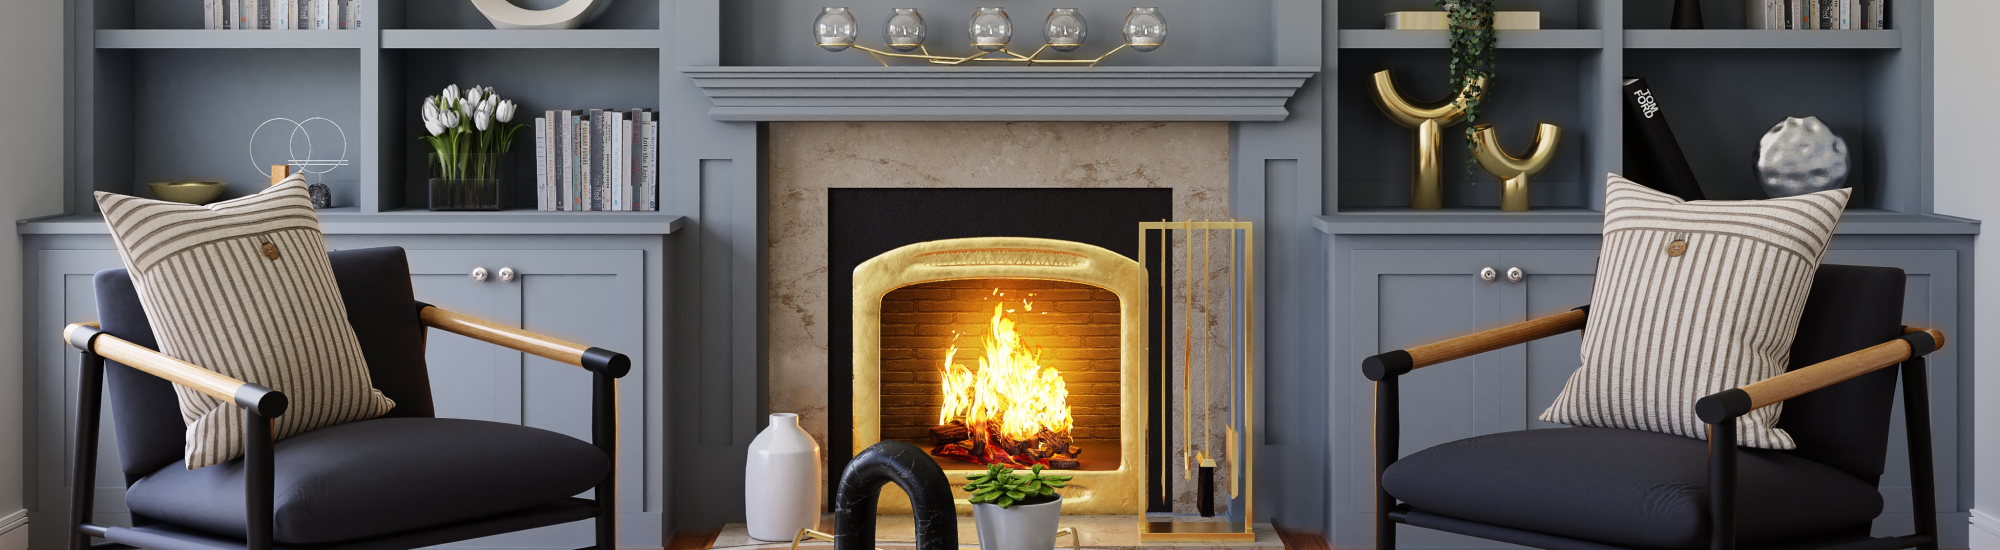 Kluesner Flooring in the Manchester, IA area also offers fireplaces from Legacy Tile